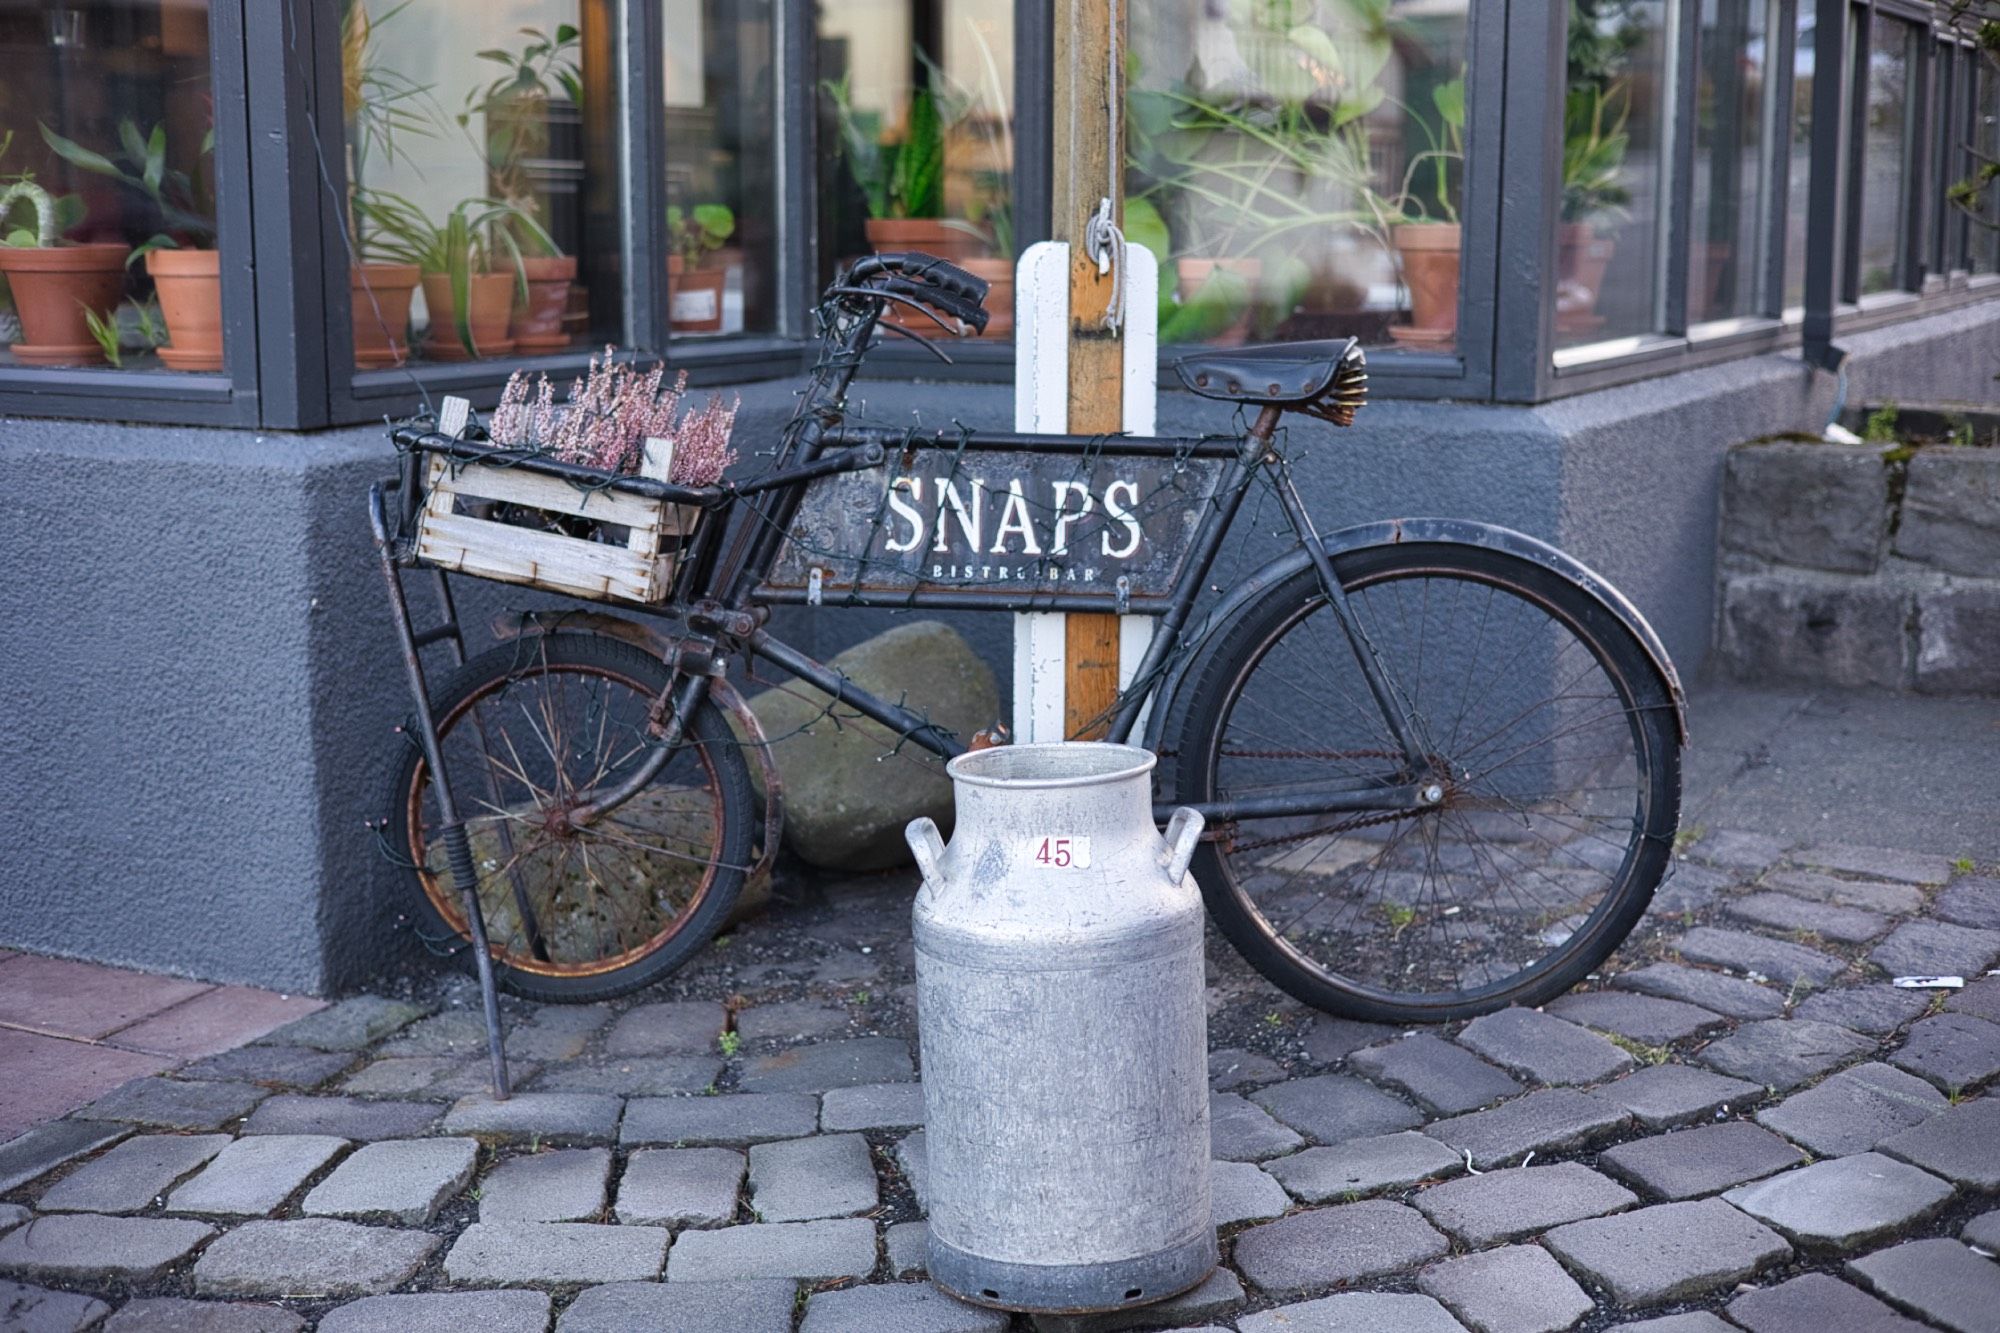 A vintage rusted bicycle serving as a sign for Snaps Bistro restaurant